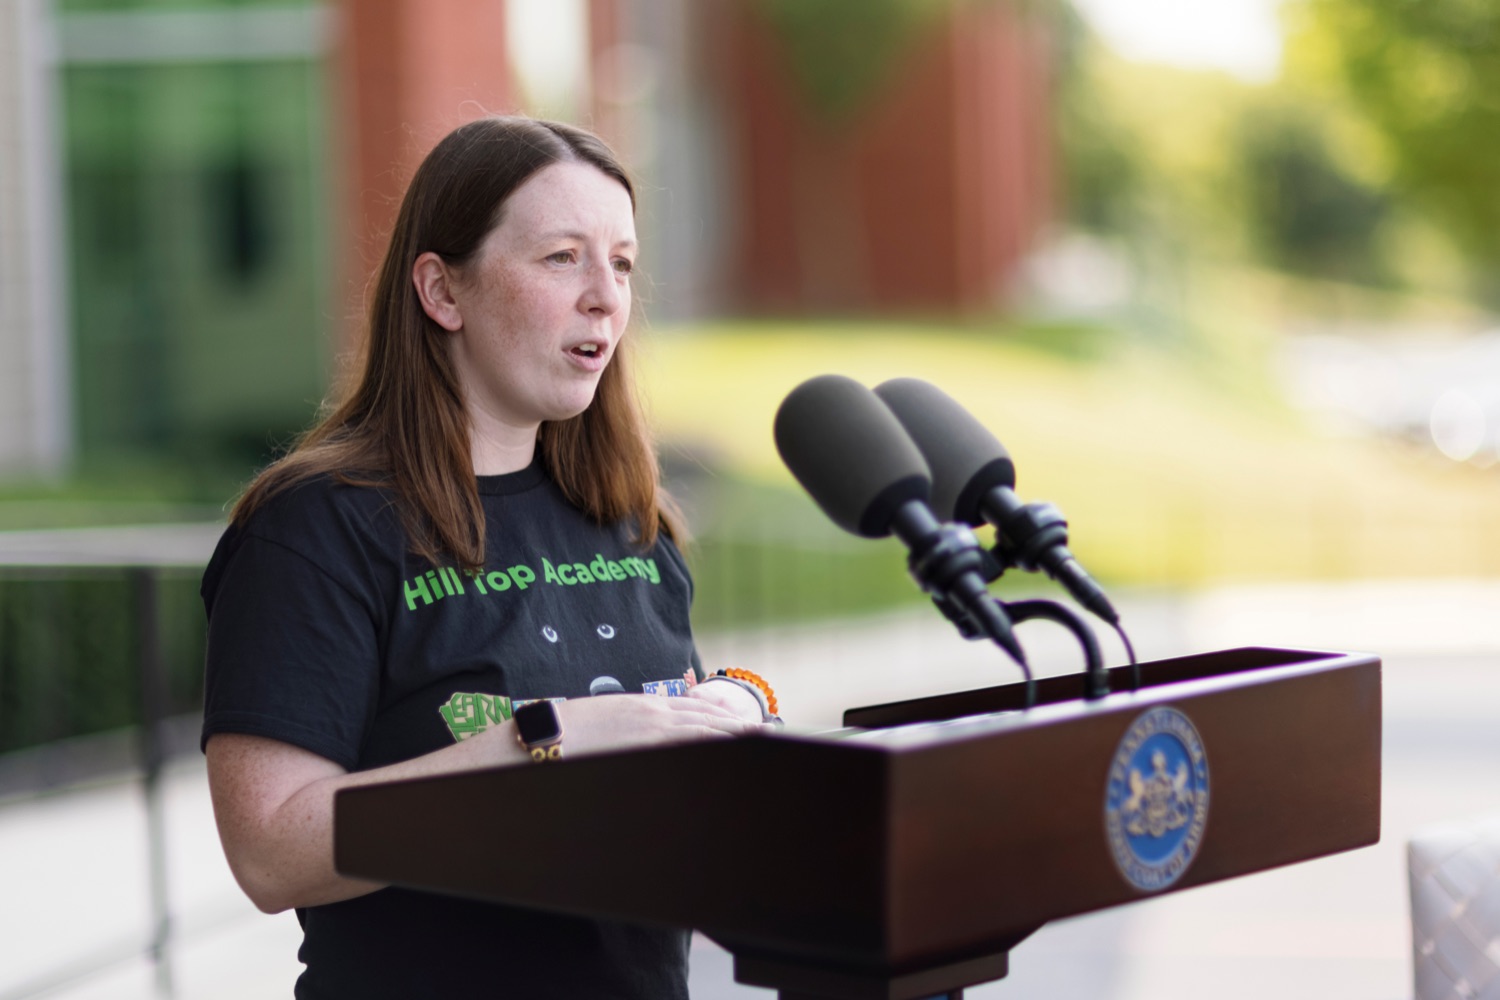 Jennifer Sciacca, of Hill Top Academy and grant project manager of Farm to School, speaks during a press conference, which highlighted the success of Pennsylvania's farm to school programs, at Hill Top Academy in Mechanicsburg on Friday, August 27, 2021.<br><a href="https://filesource.amperwave.net/commonwealthofpa/photo/19054_AGRIC_FarmToSchool_NK_011.jpg" target="_blank">⇣ Download Photo</a>